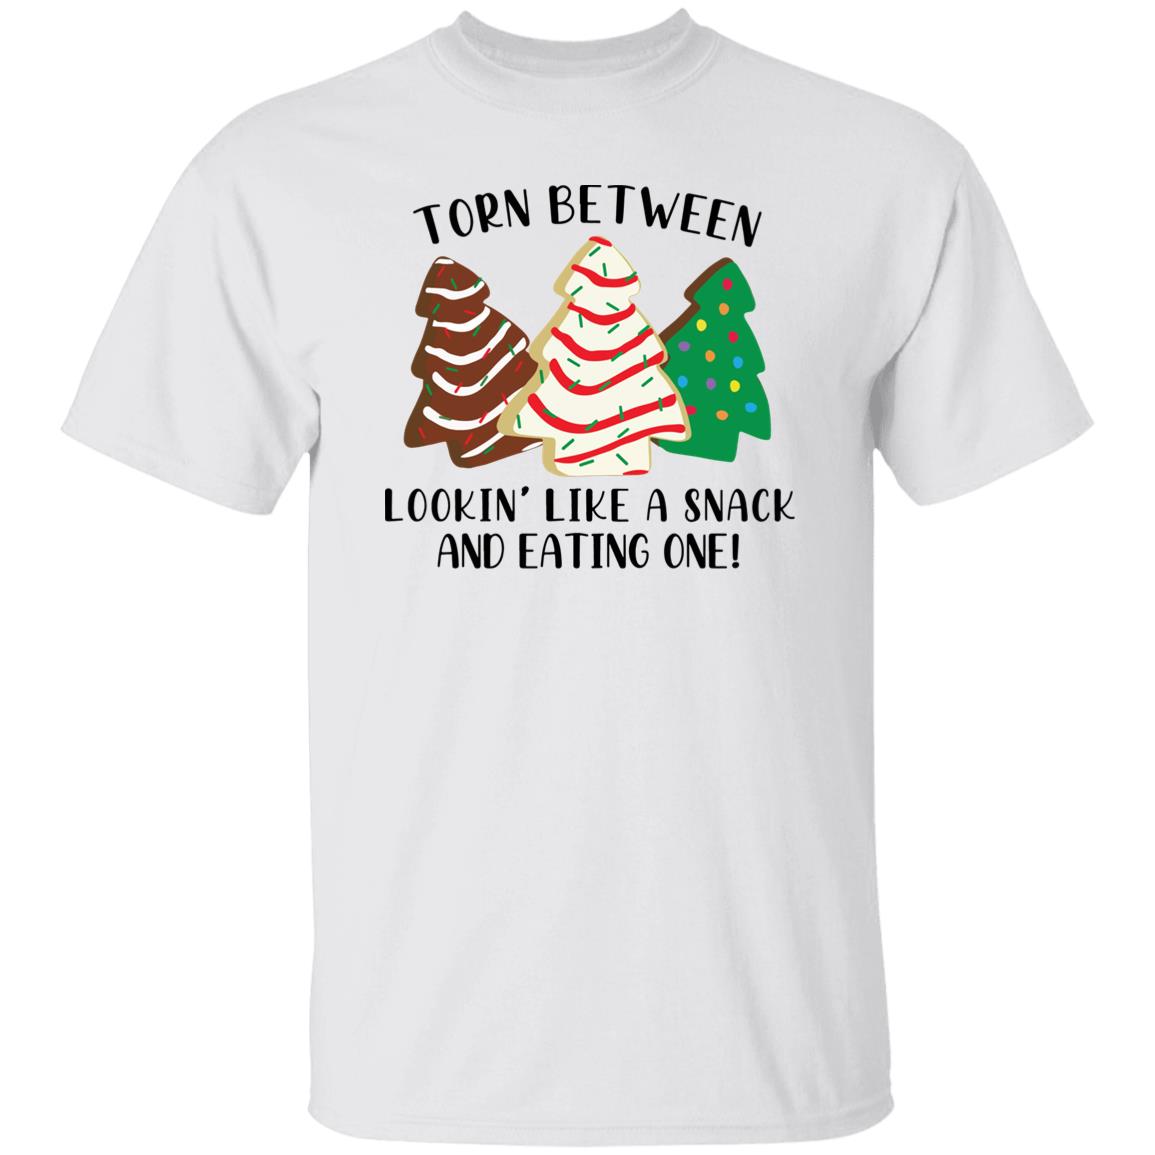 Little debbie Torn between looking like a snack and cat in one Christmas shirt